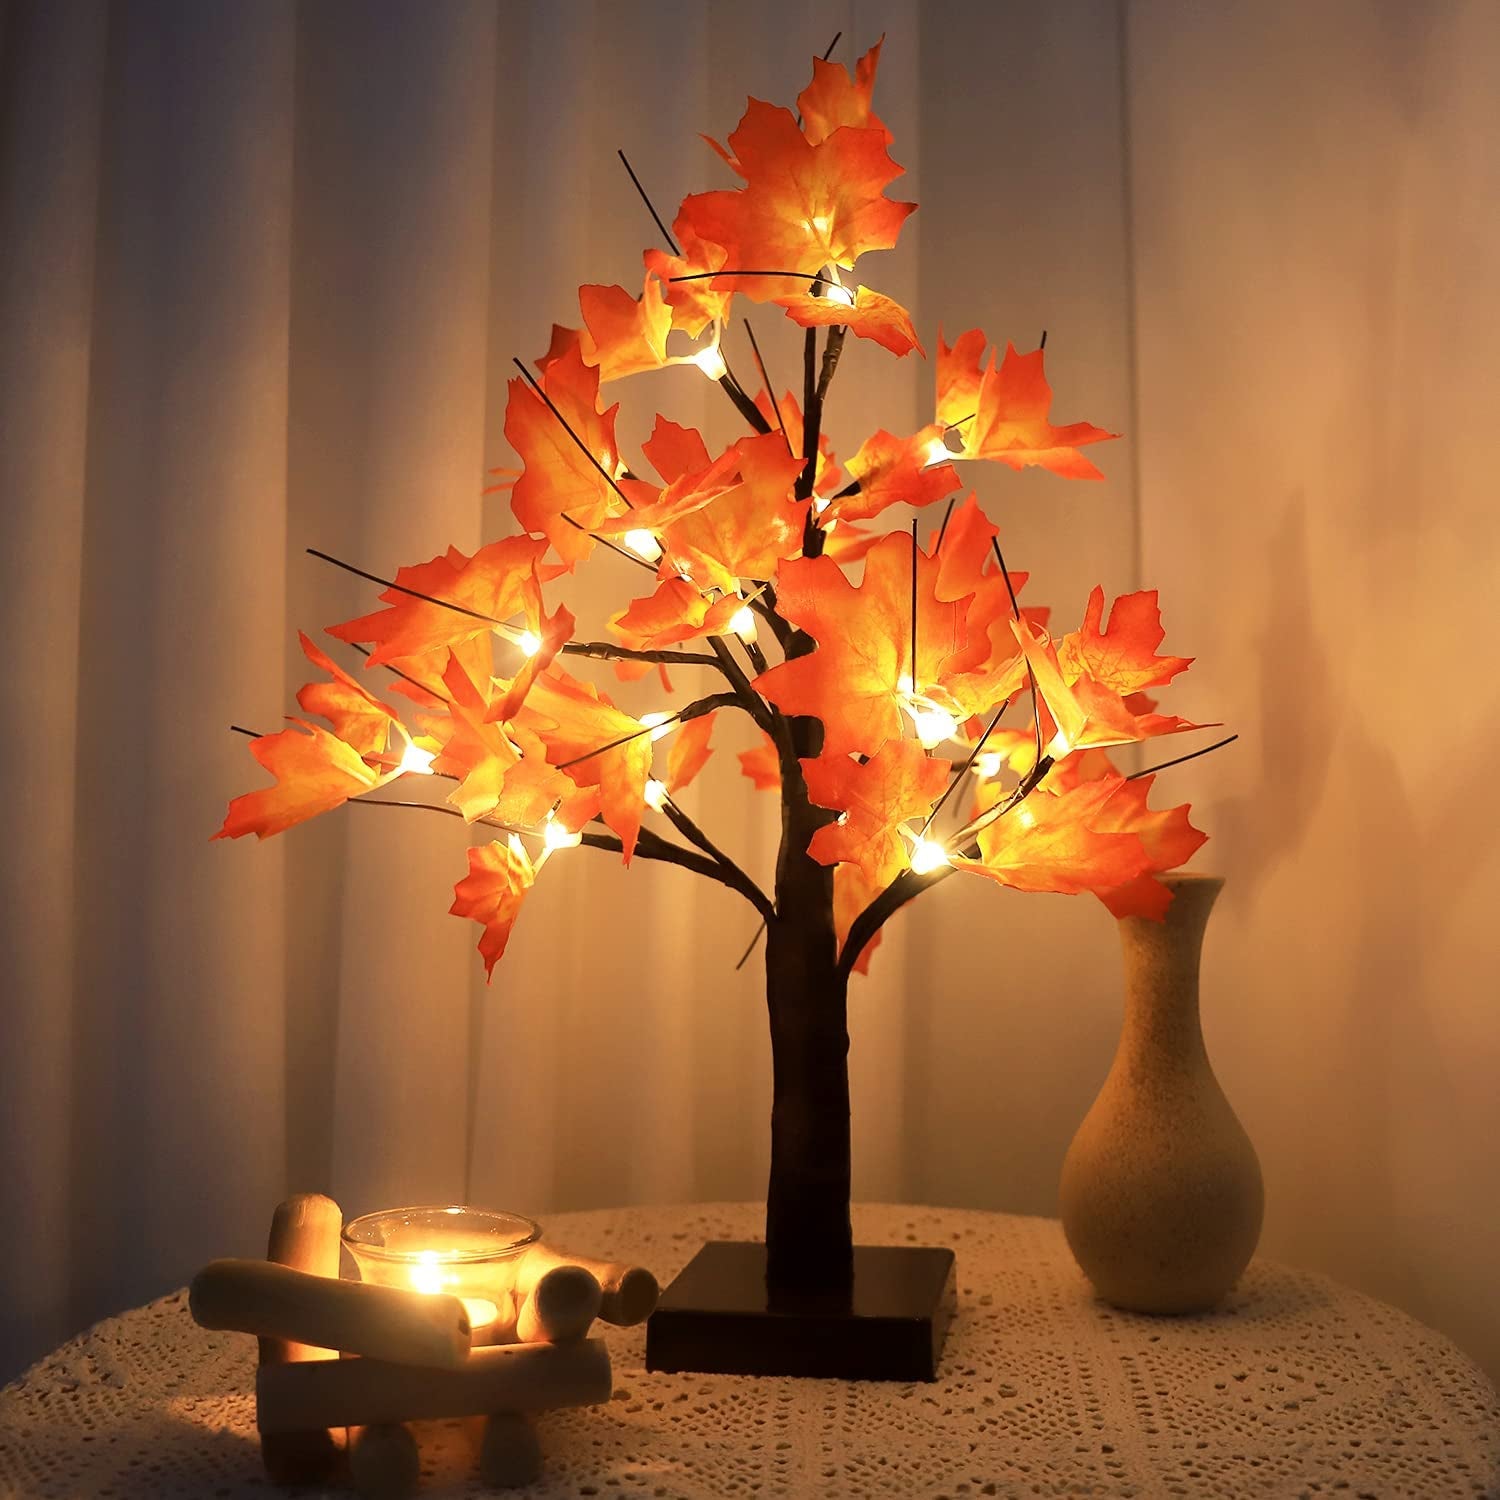 Lighted Maple Tree Thanksgiving Decorations, 24LED Tabletop Tree Lights Artificial Bonsai Tree Lamp Fall Centerpieces for Tables, Autumn Christmas, Halloween, Fall Decor for Home Warm White